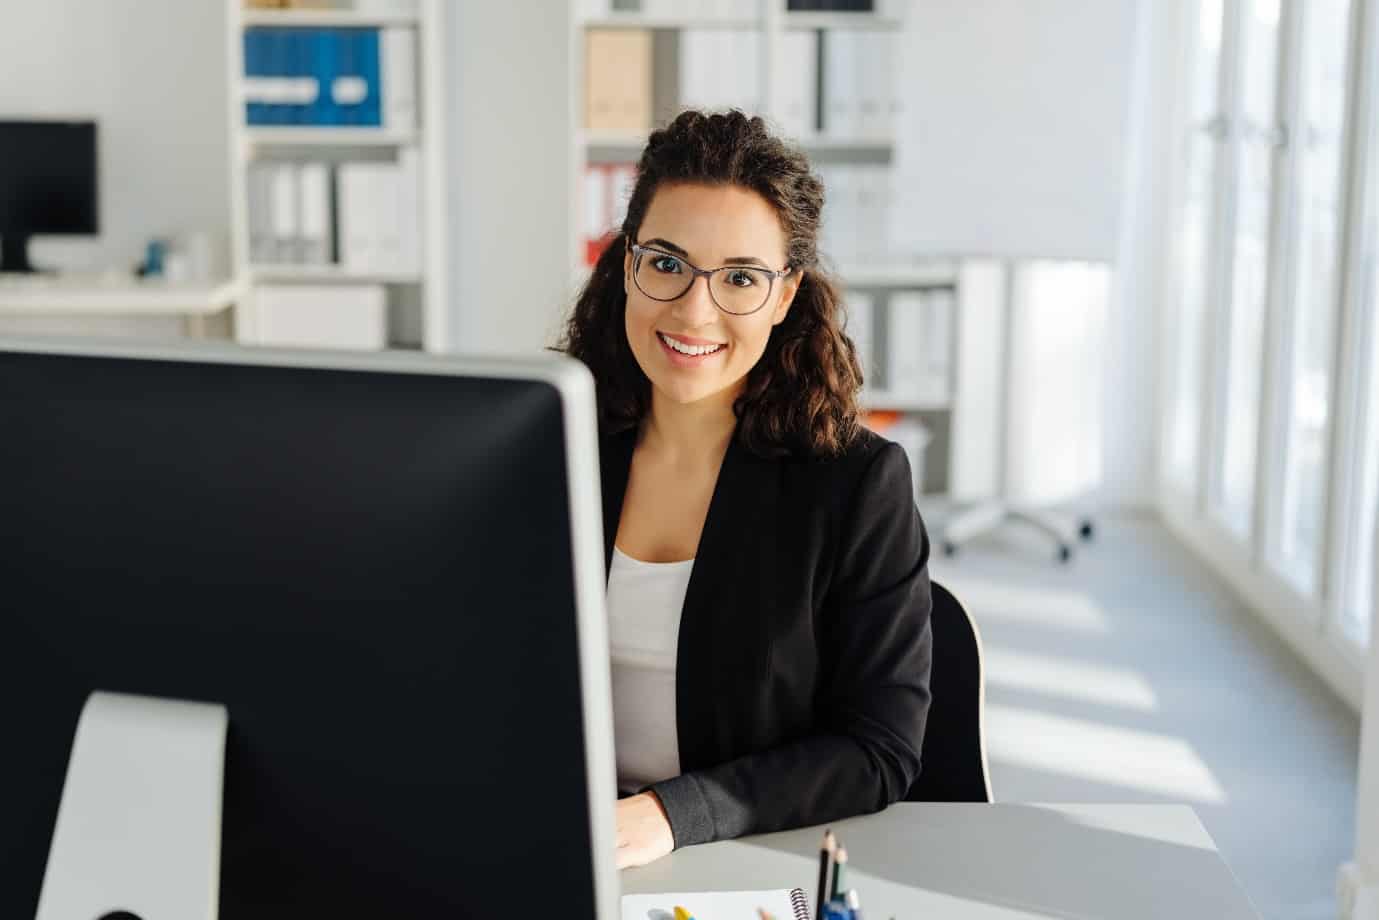 Young businesswoman sitting working at a desktop computer in the office